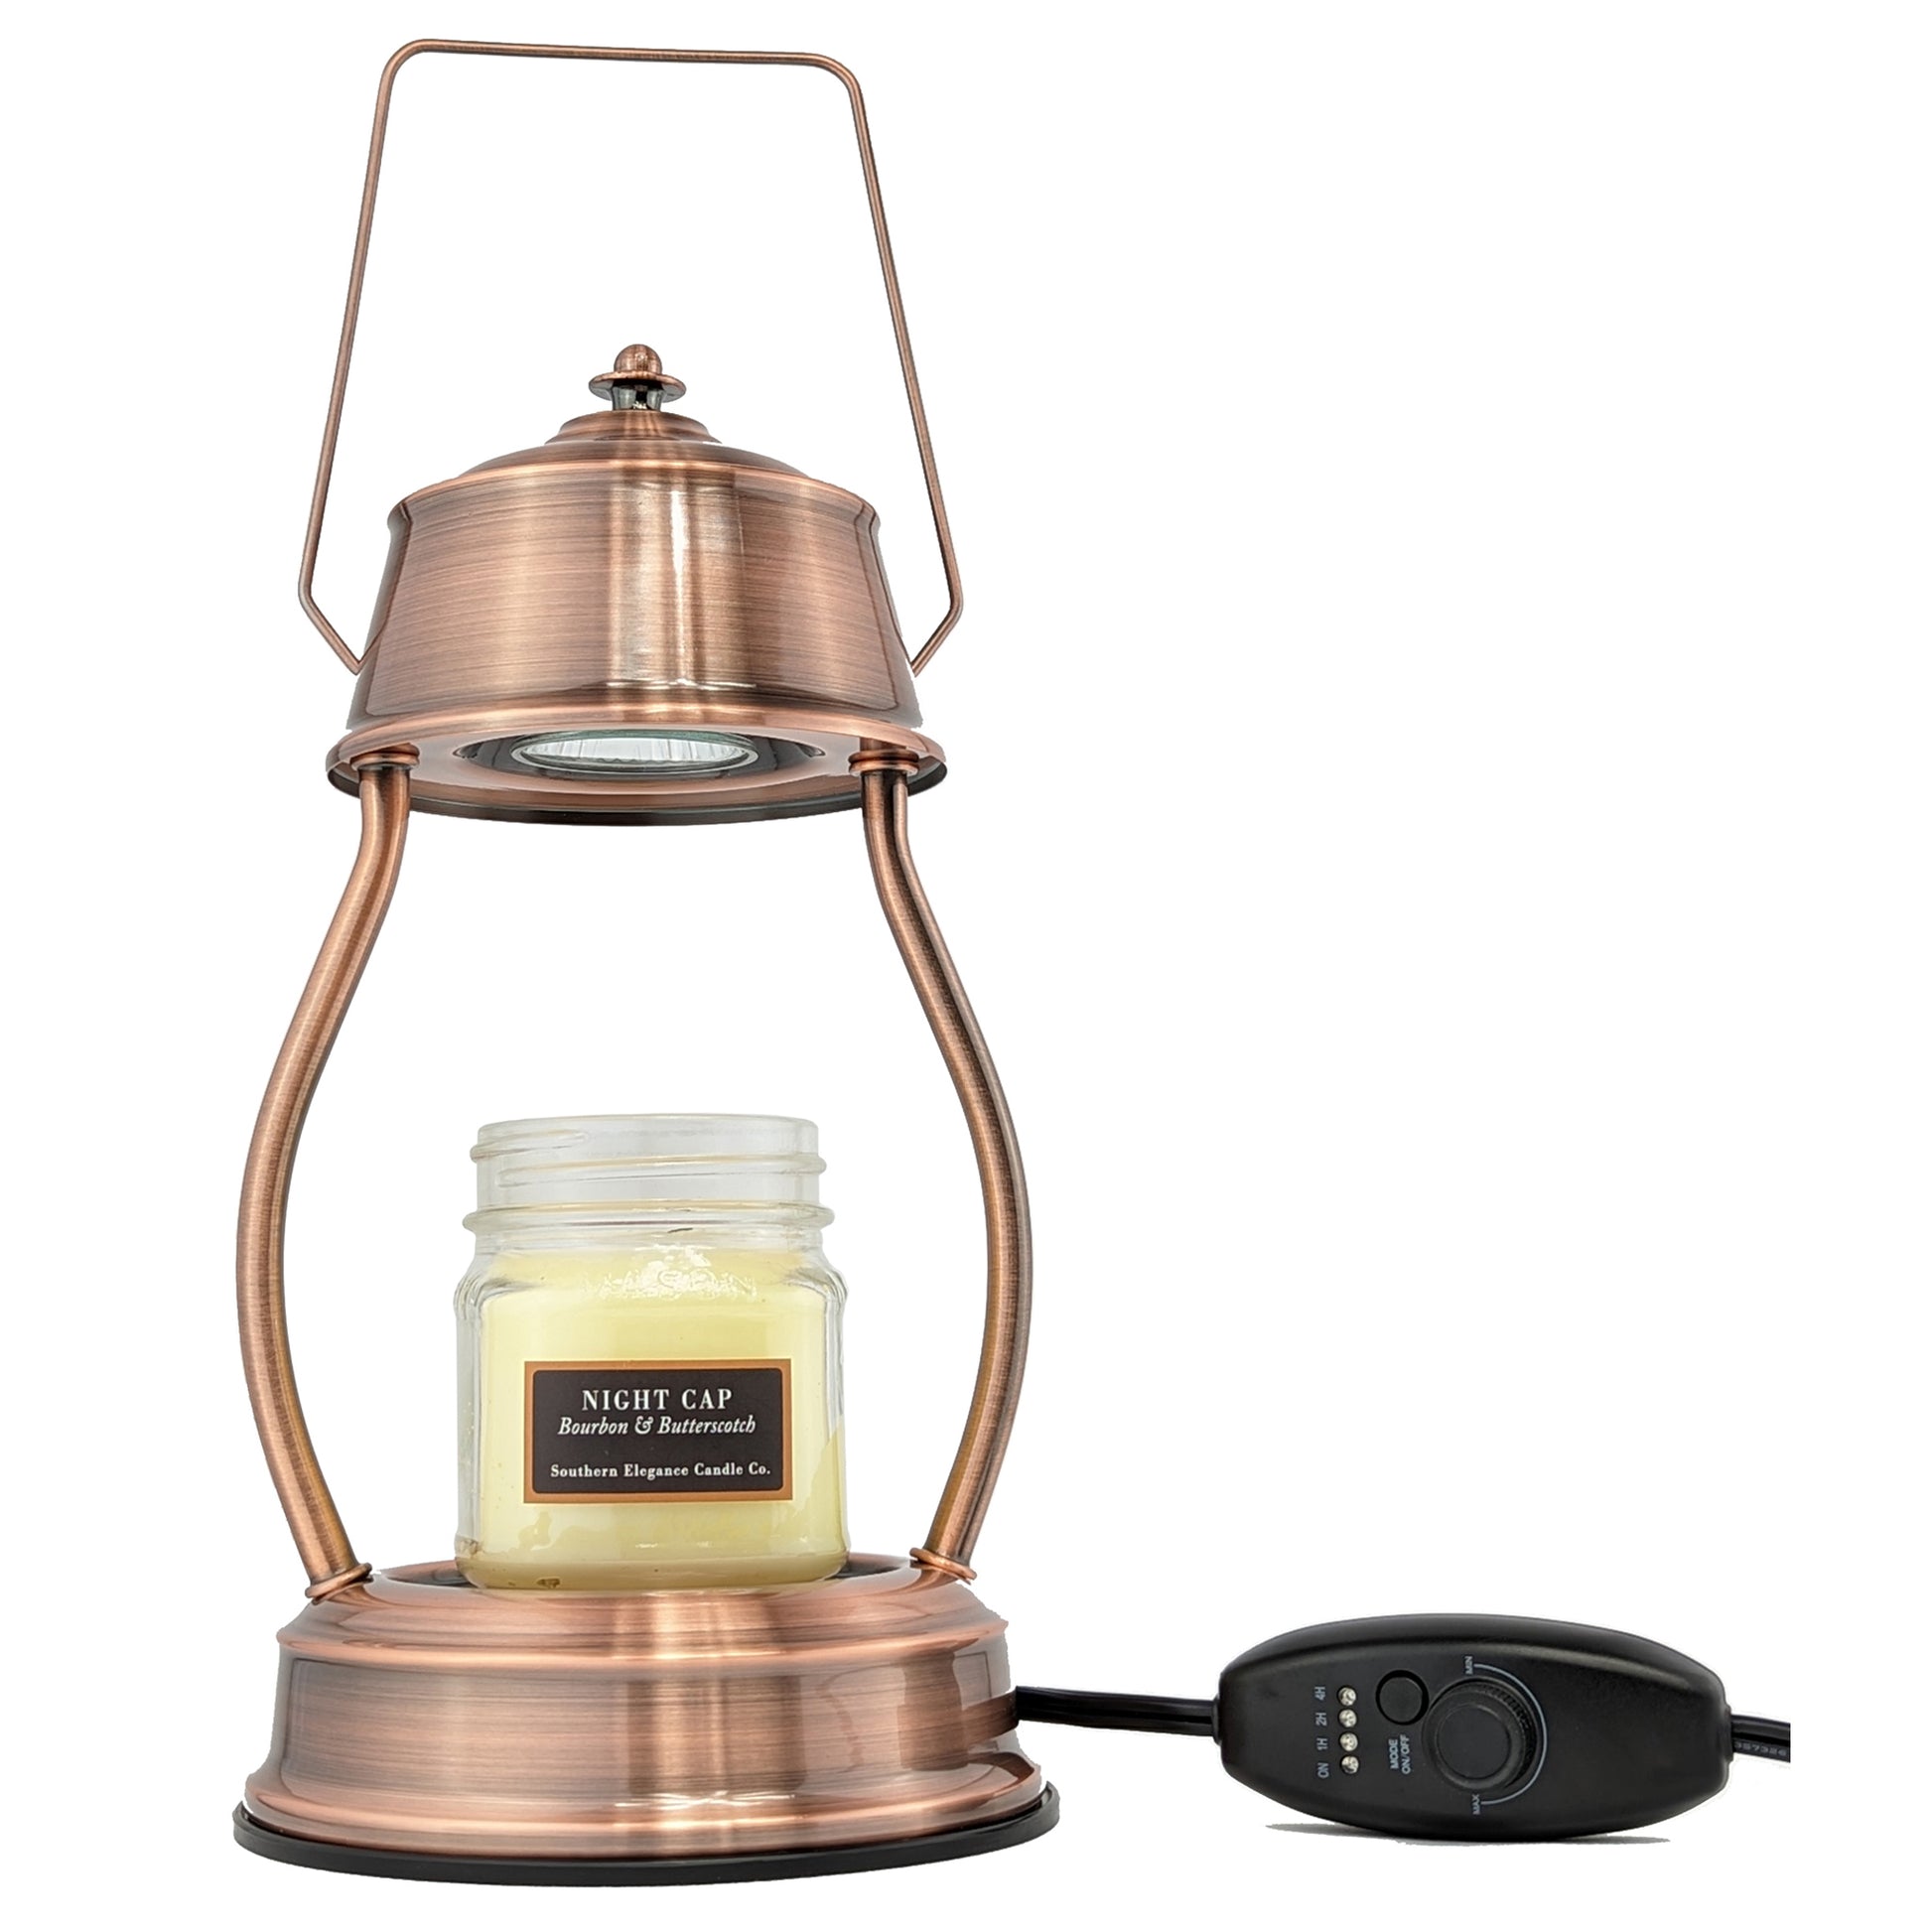 Image, copper candle warmer with a large pink scented candle and dimmer on/off controller shown.